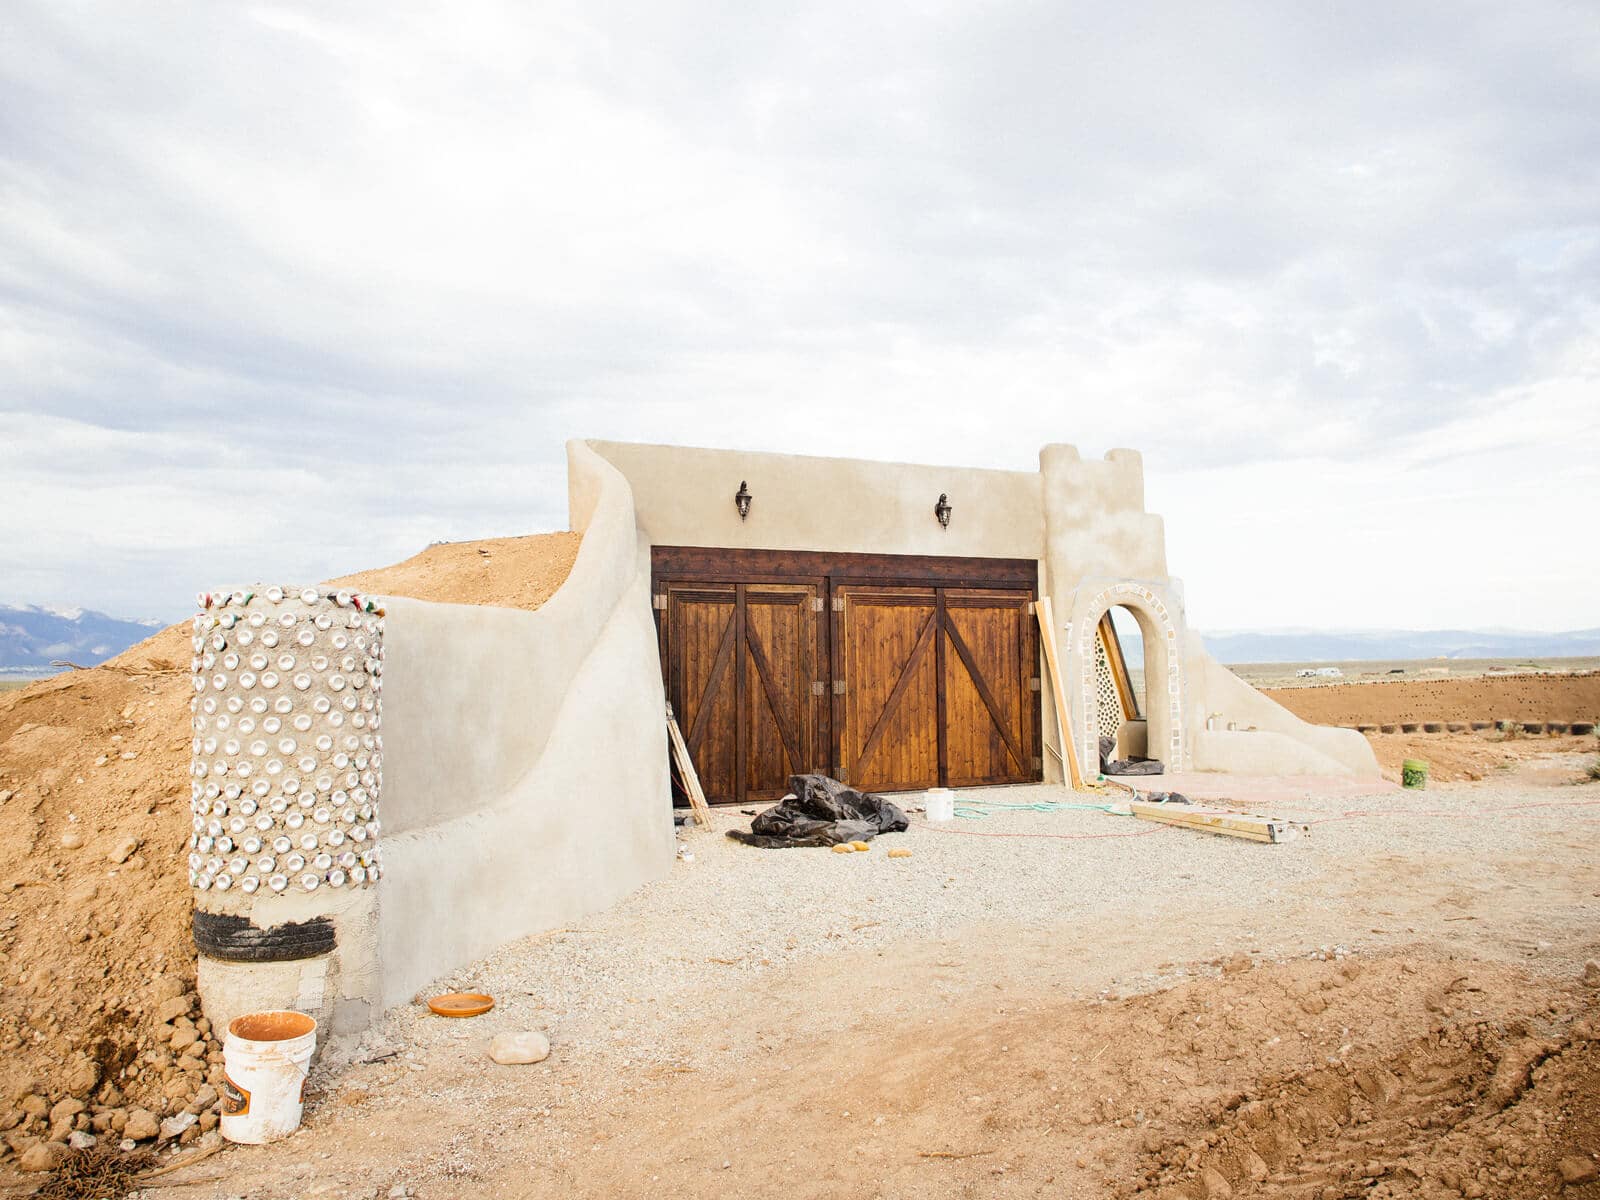 Earthship garage in mid-construction